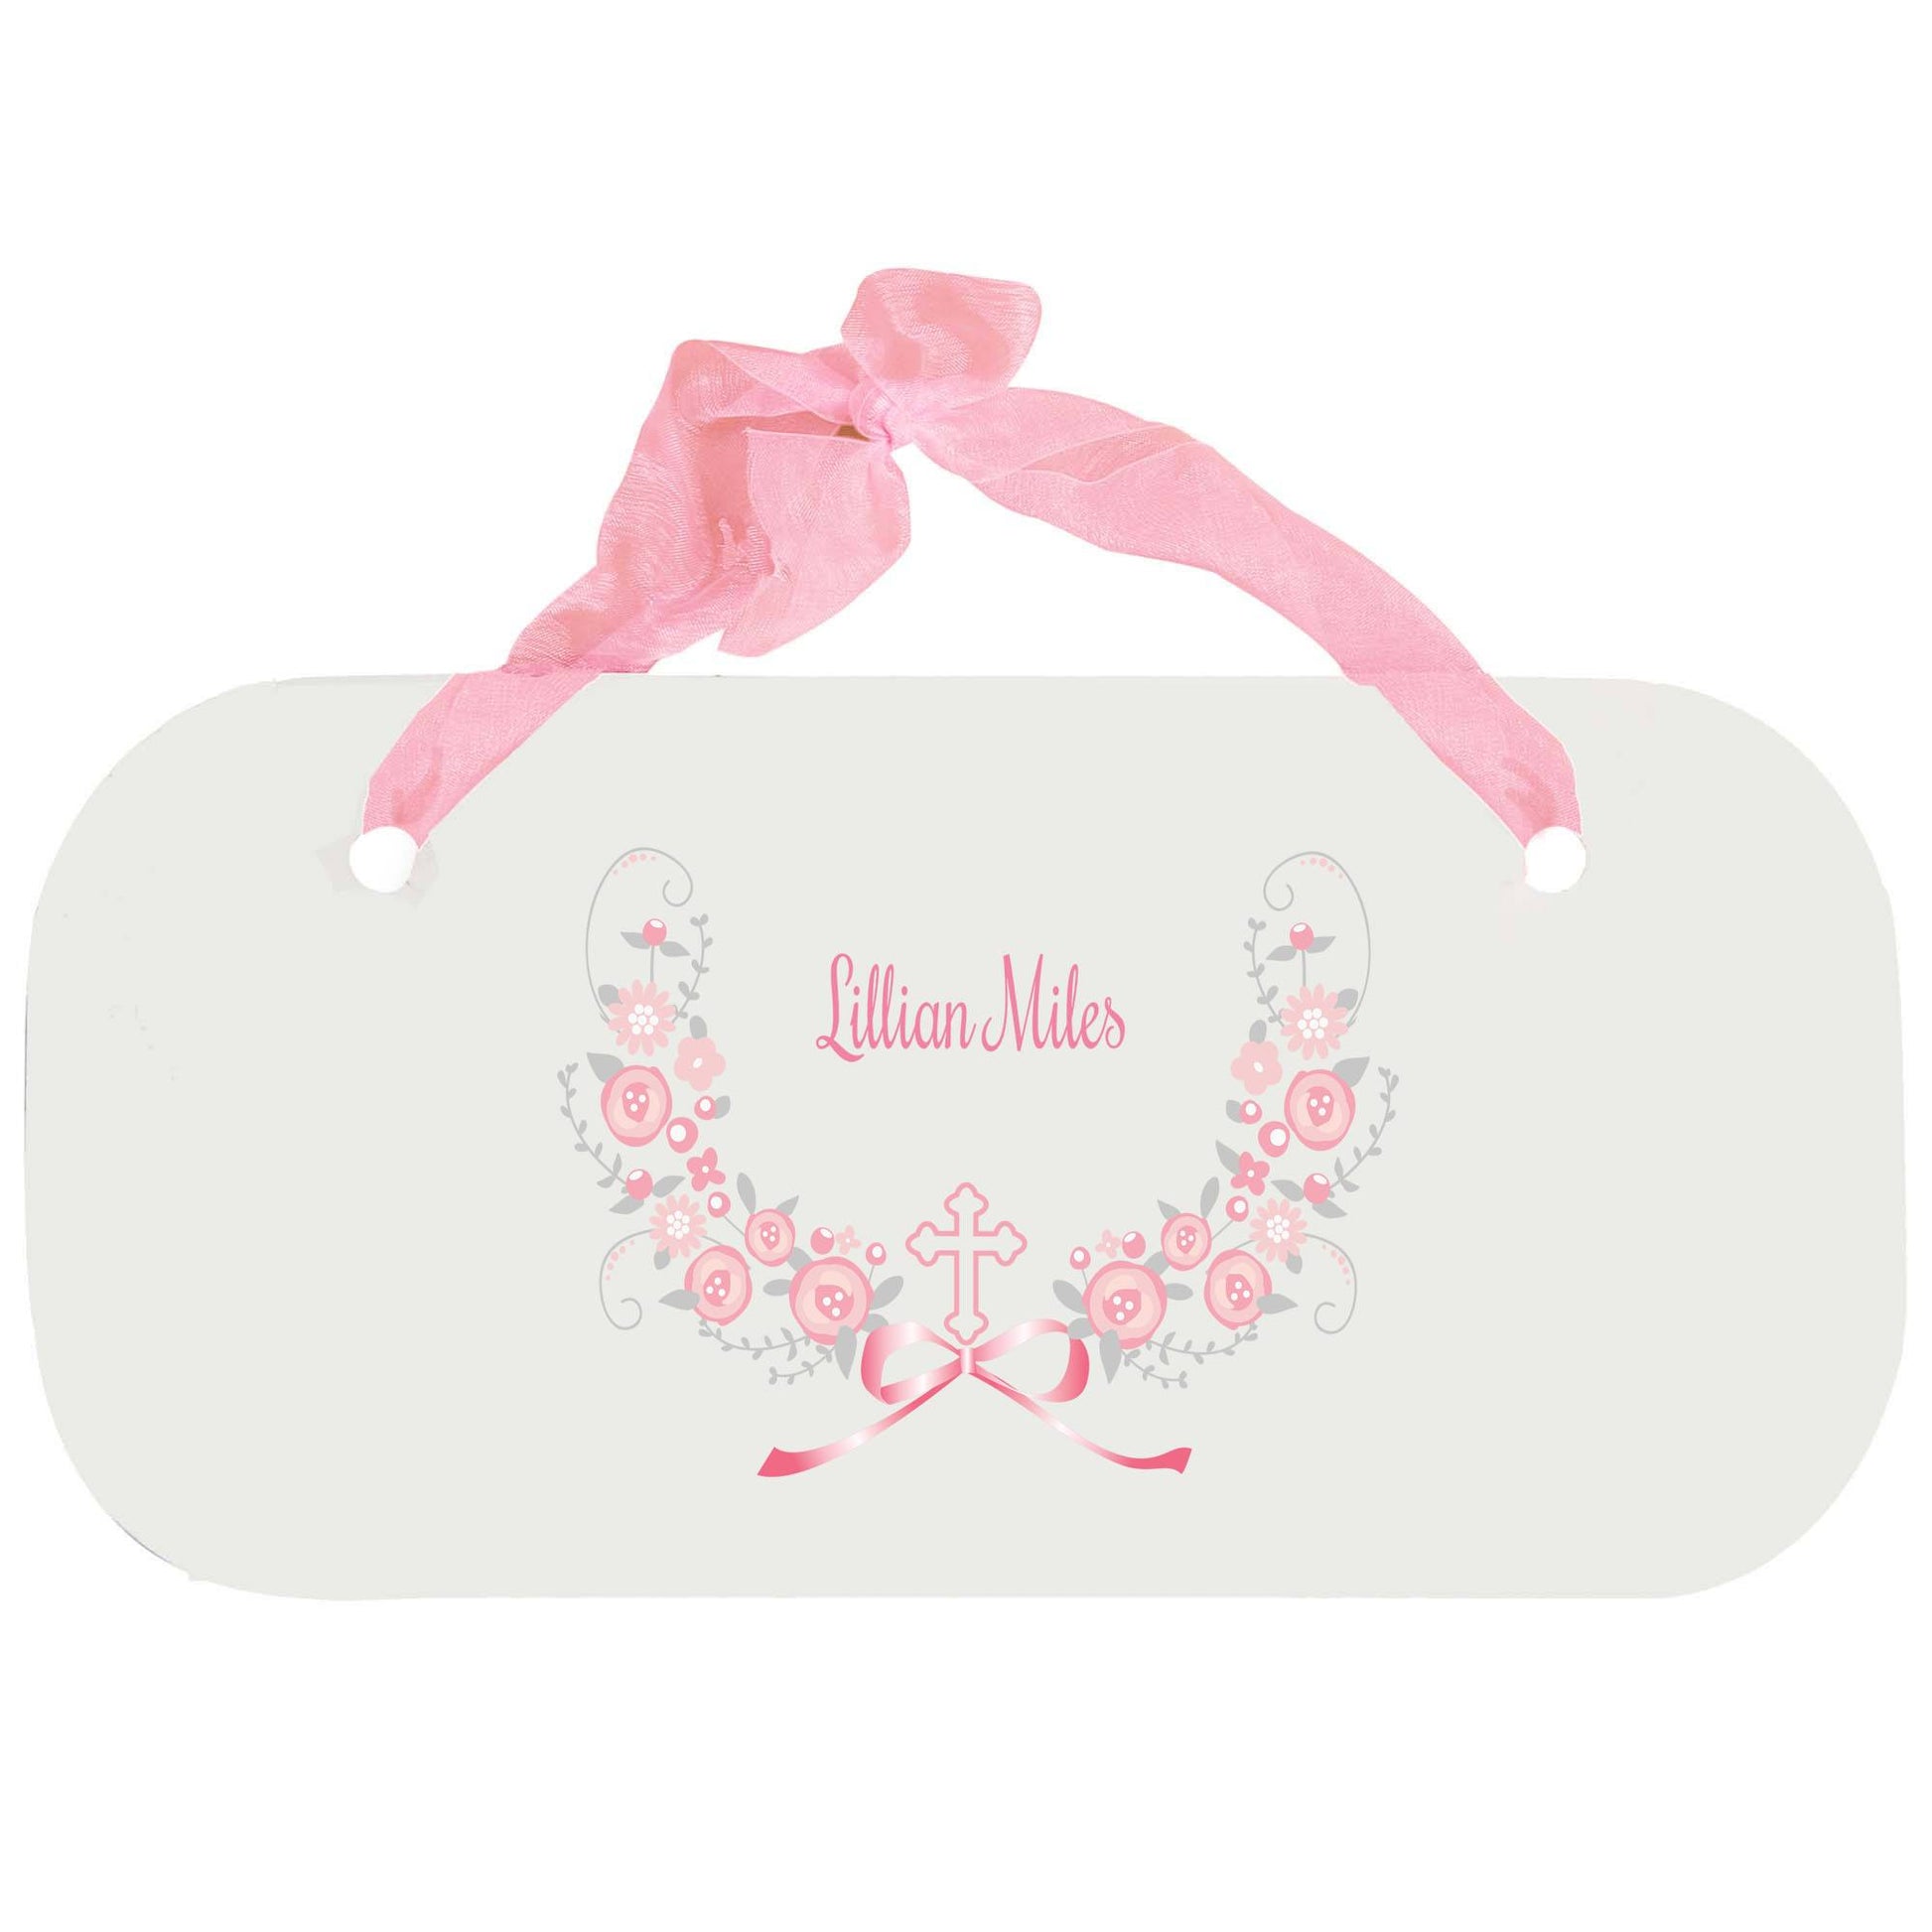 Personalized Girls Wall Plaque with Hc Pink Gray Floral Garland design